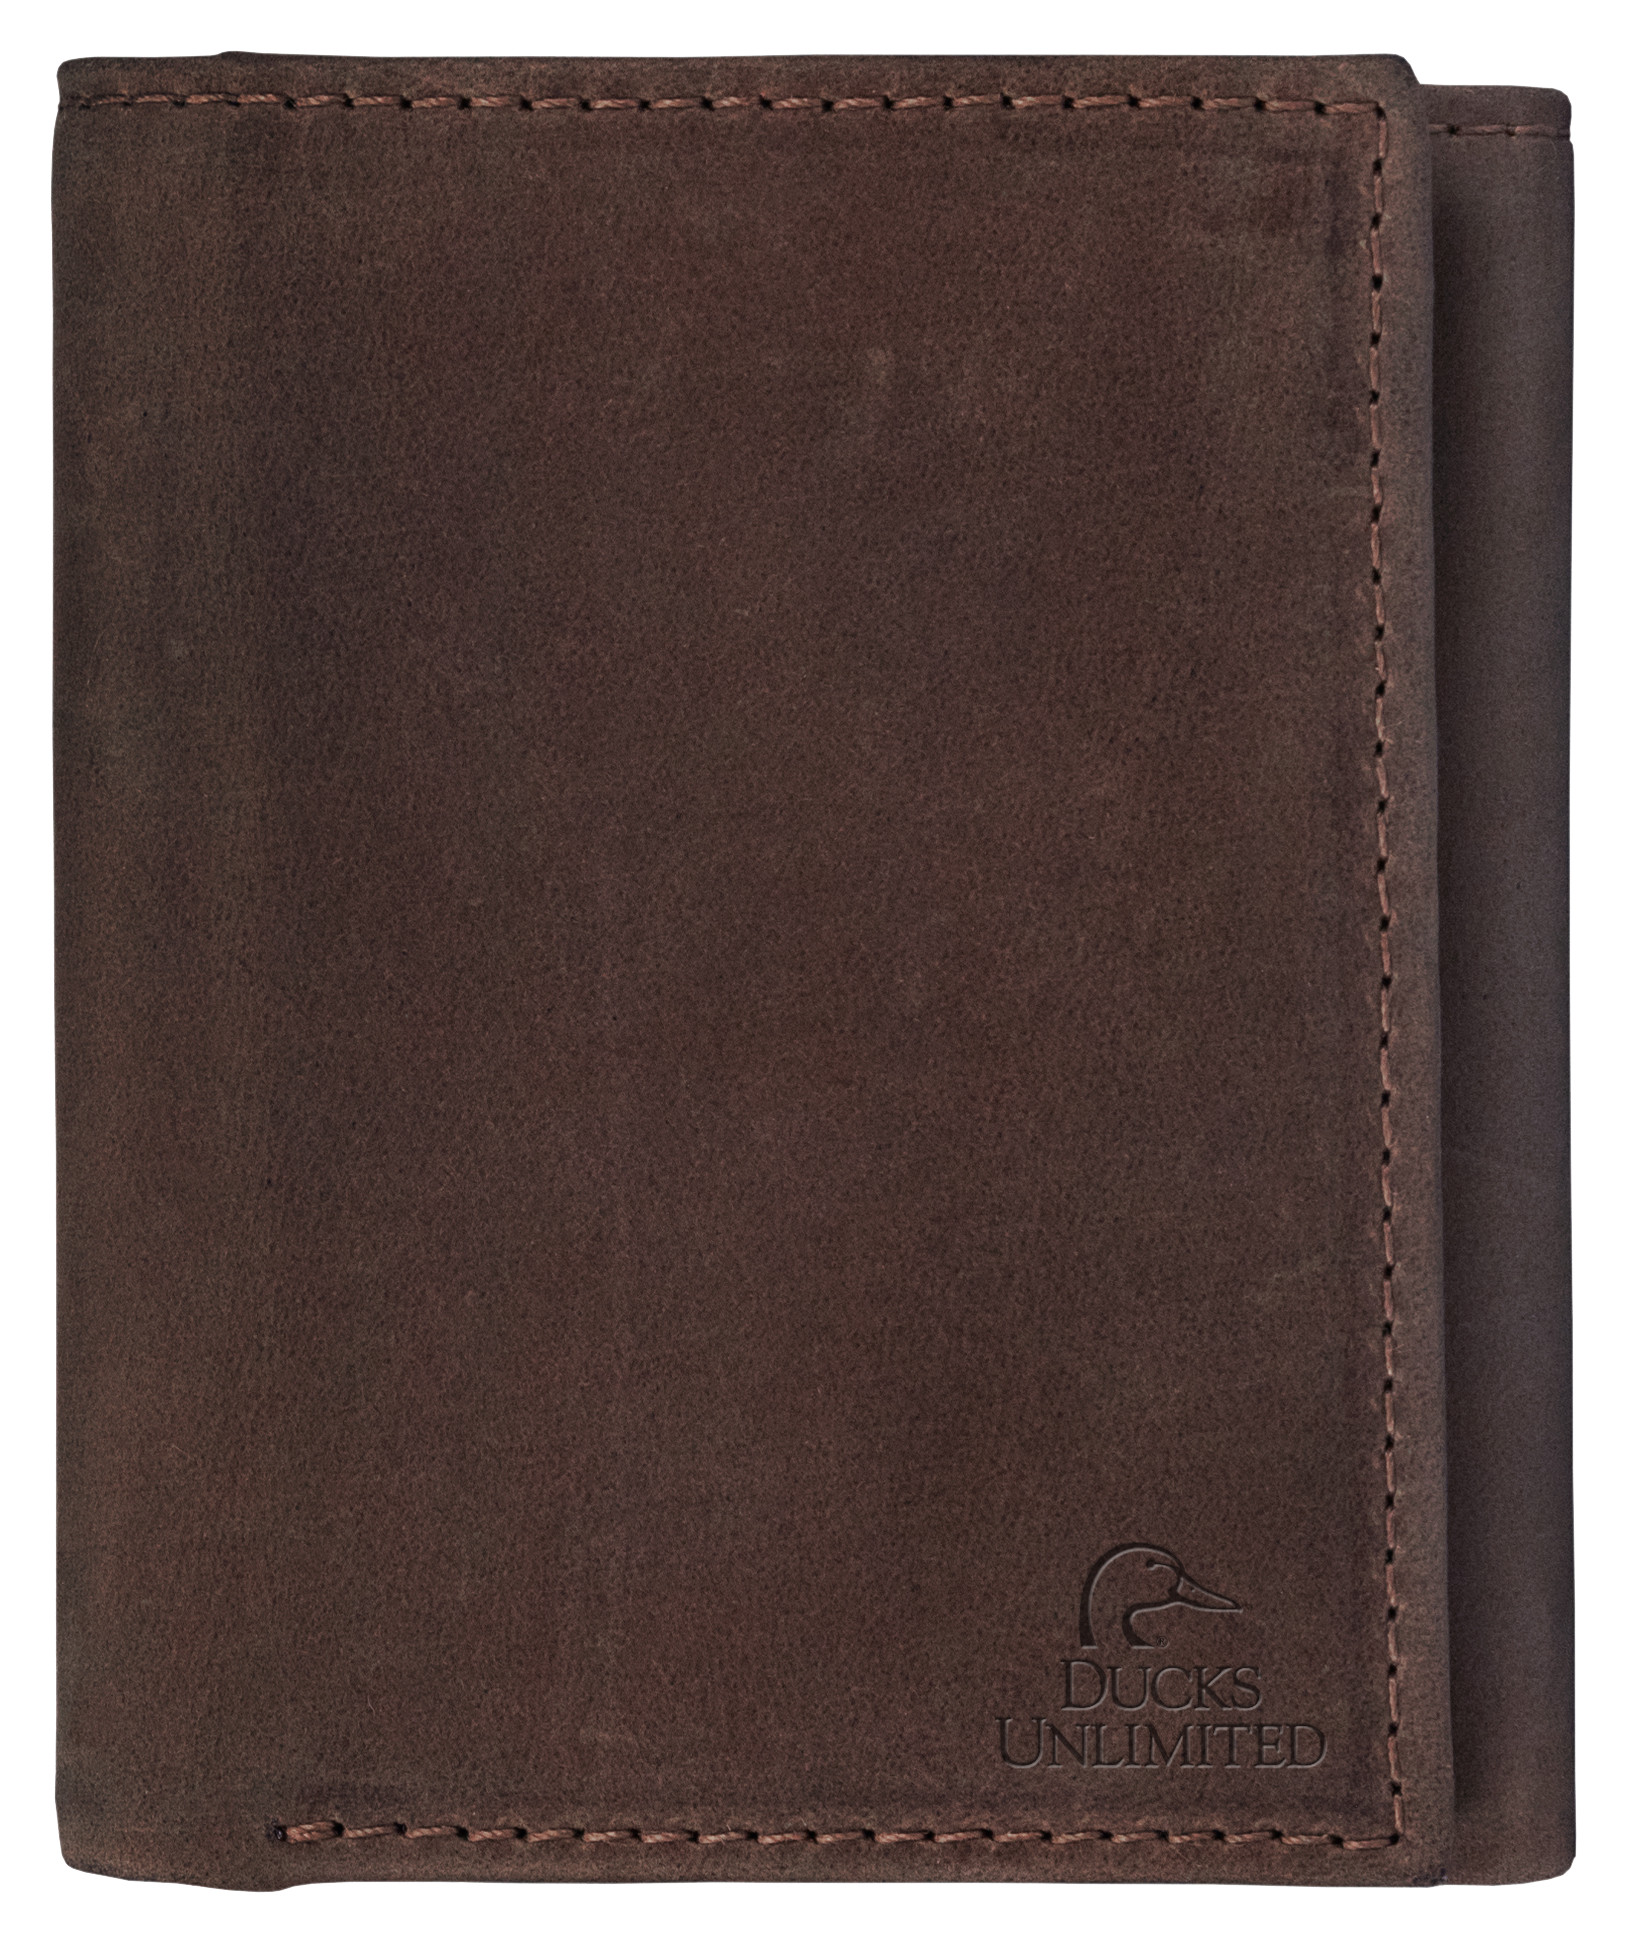 Ducks Unlimited Leather Trifold Wallet